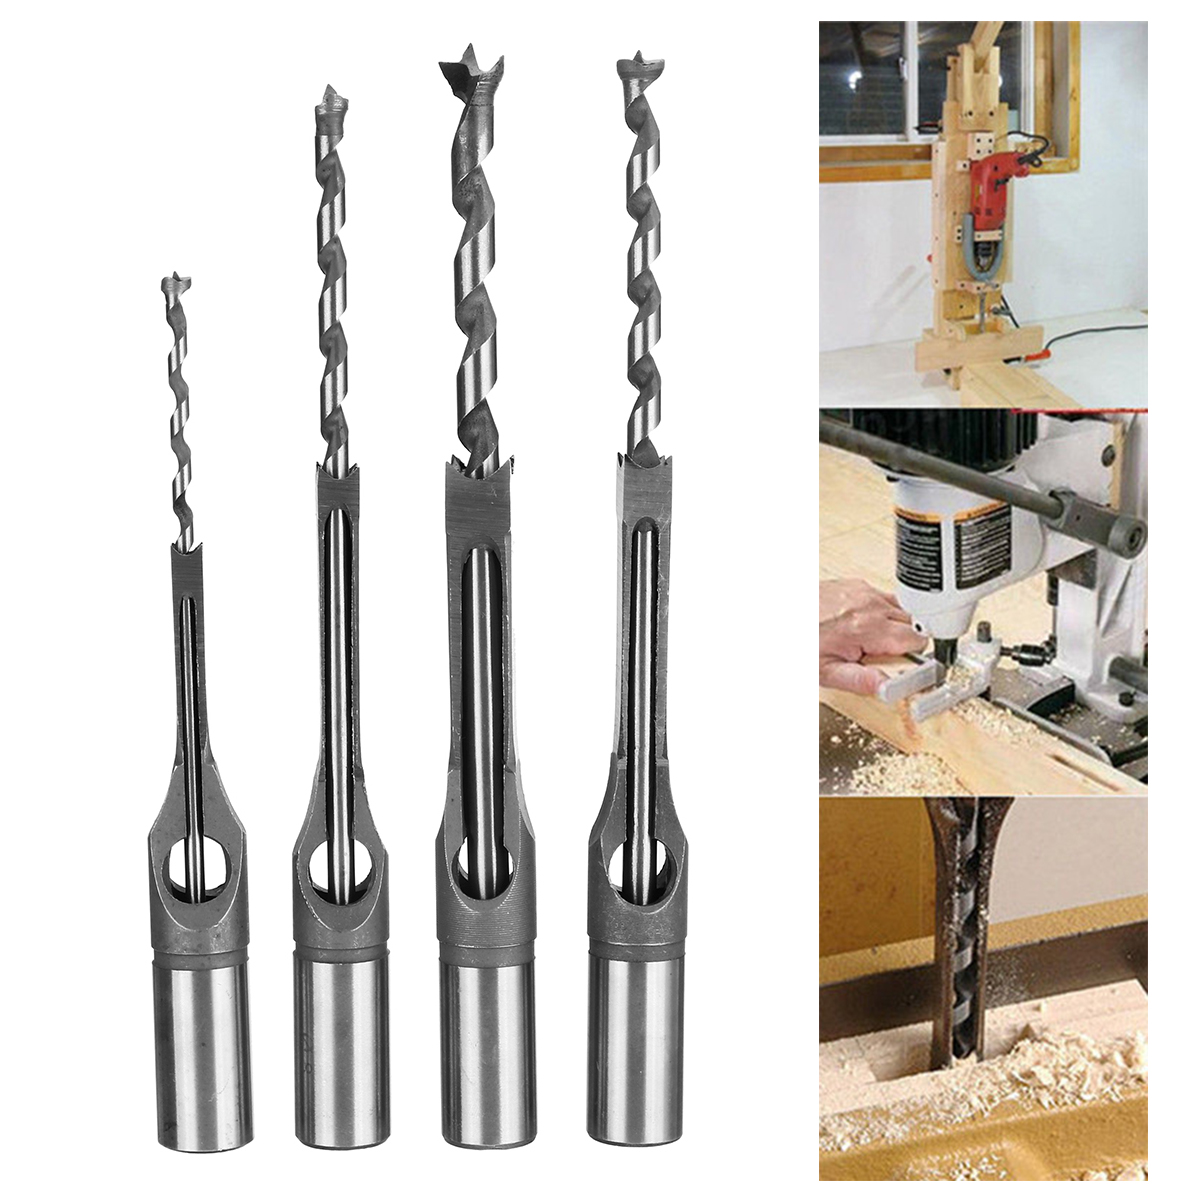 

6.4/8/9.5/12.7mm Square Hole Mortiser Drill Bit Mortising Chisel Auger HSS Twist Drill Woodworking Tool